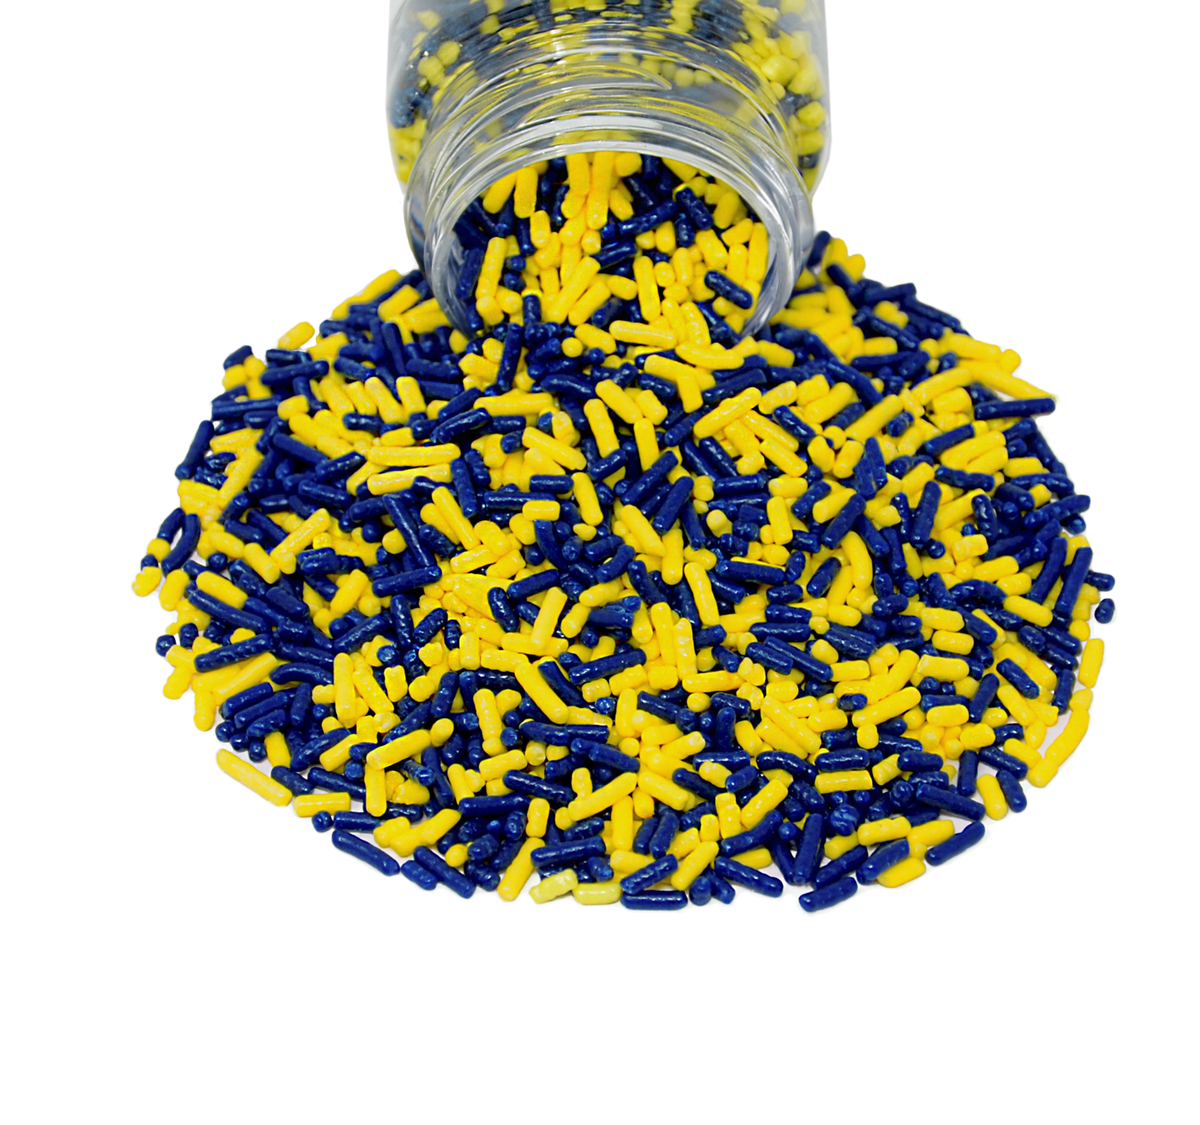 Load image into Gallery viewer, The Big Game: Navy Blue &amp;amp; Yellow Jimmy Mix 3oz Bottle
